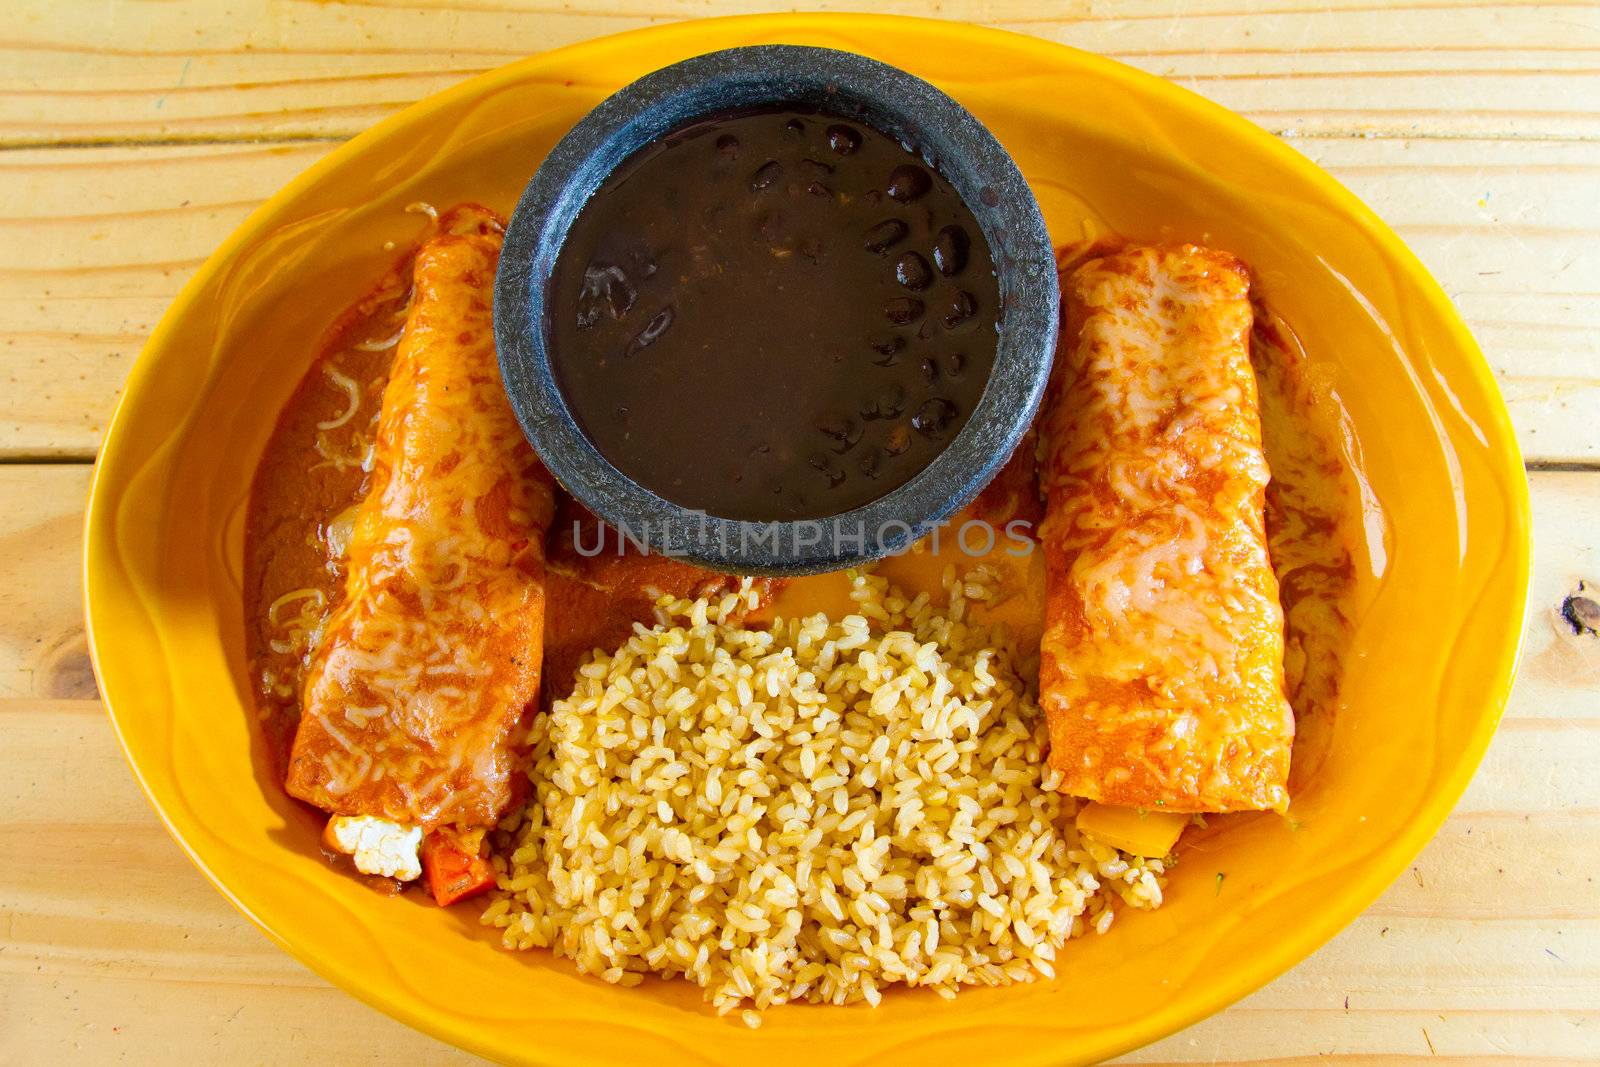 Enchiladas and rice and beans at a Mexican restaurant serving authentic cuisine.